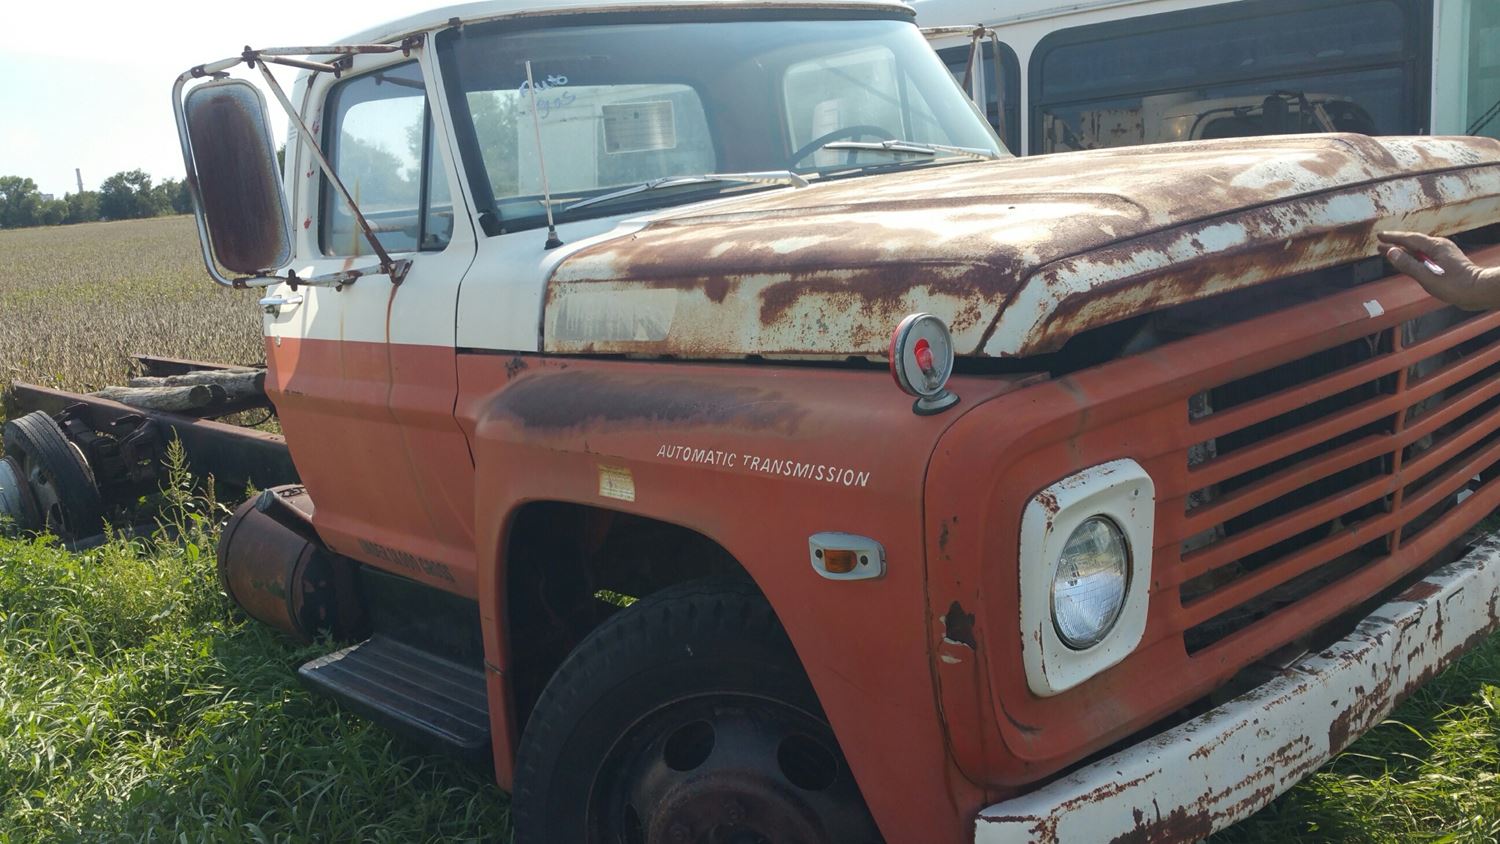 1970 FORD F600 (Stock: 10346) Details | C&H Truck Parts